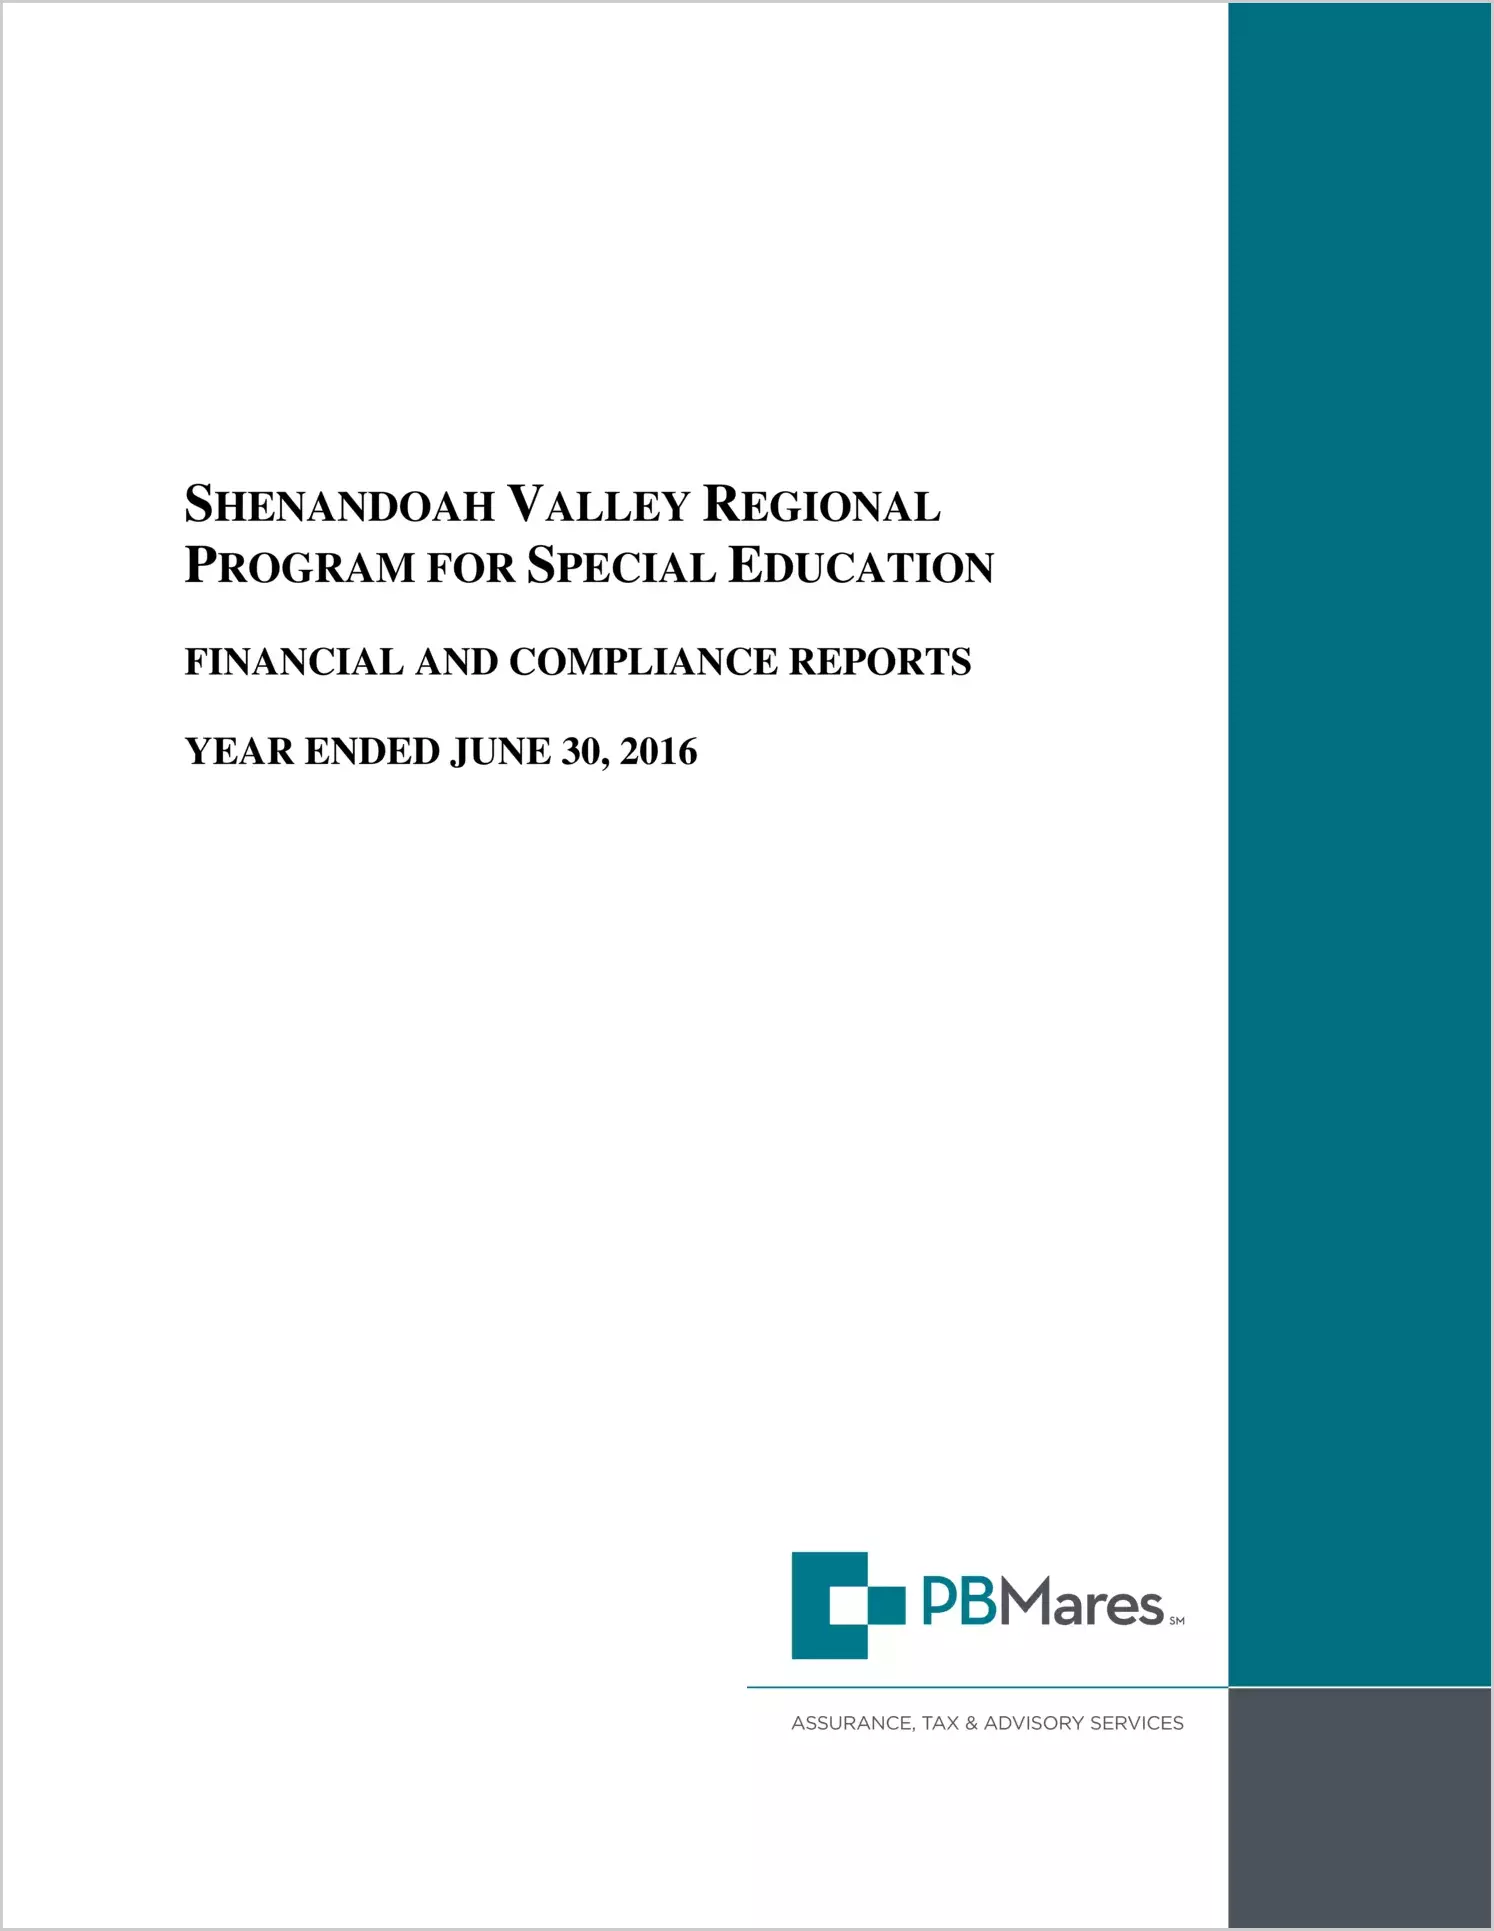 2016 ABC/Other Annual Financial Report  for Shenandoah Valley Regional Program Special Education